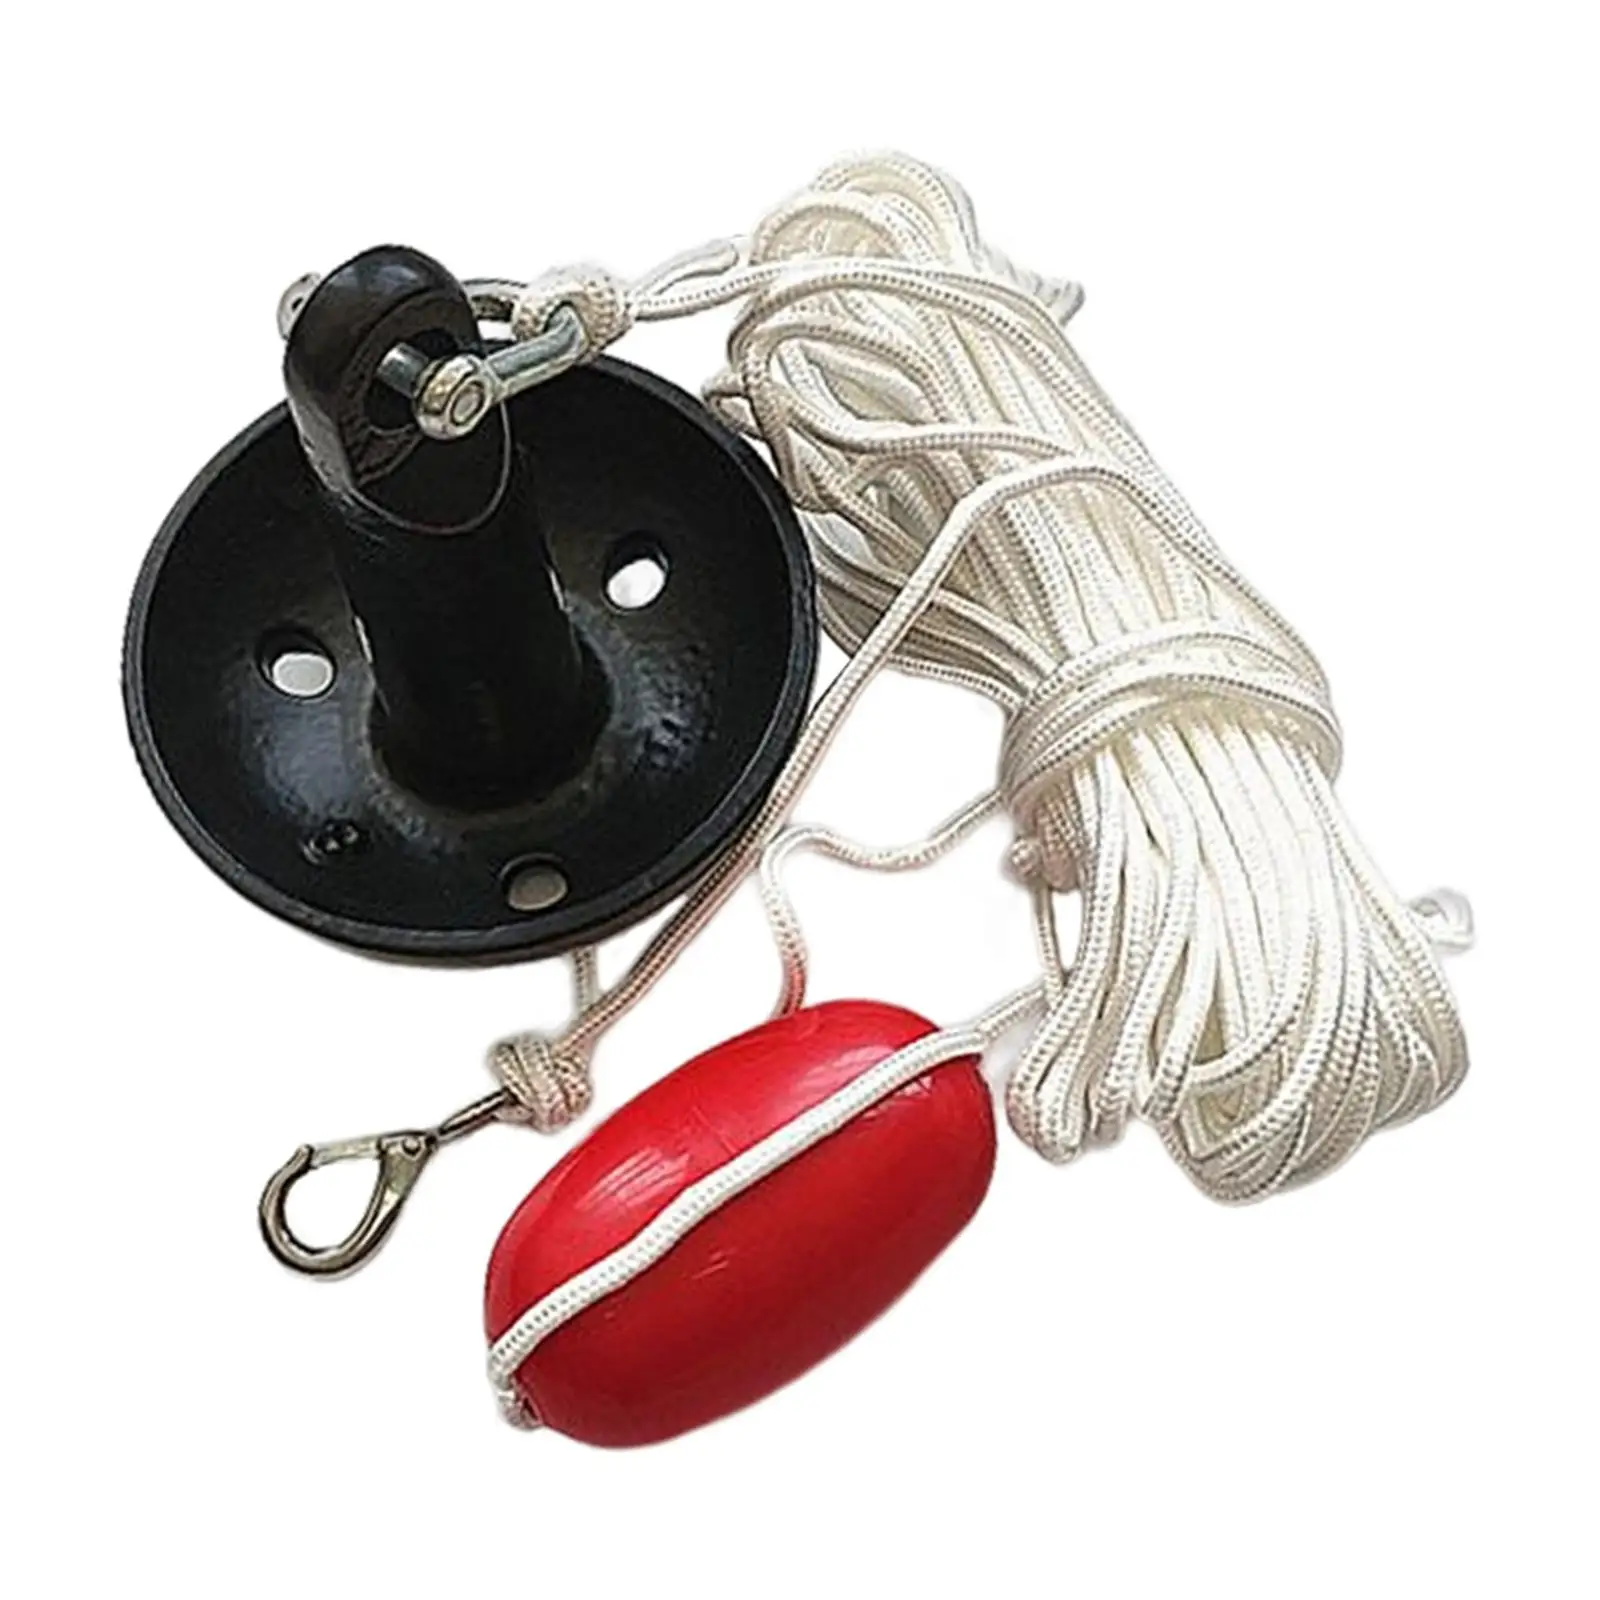 Complete Mushroom Anchor Kit 5 lb with Marker Buoy Black Fit for Canoe Boat